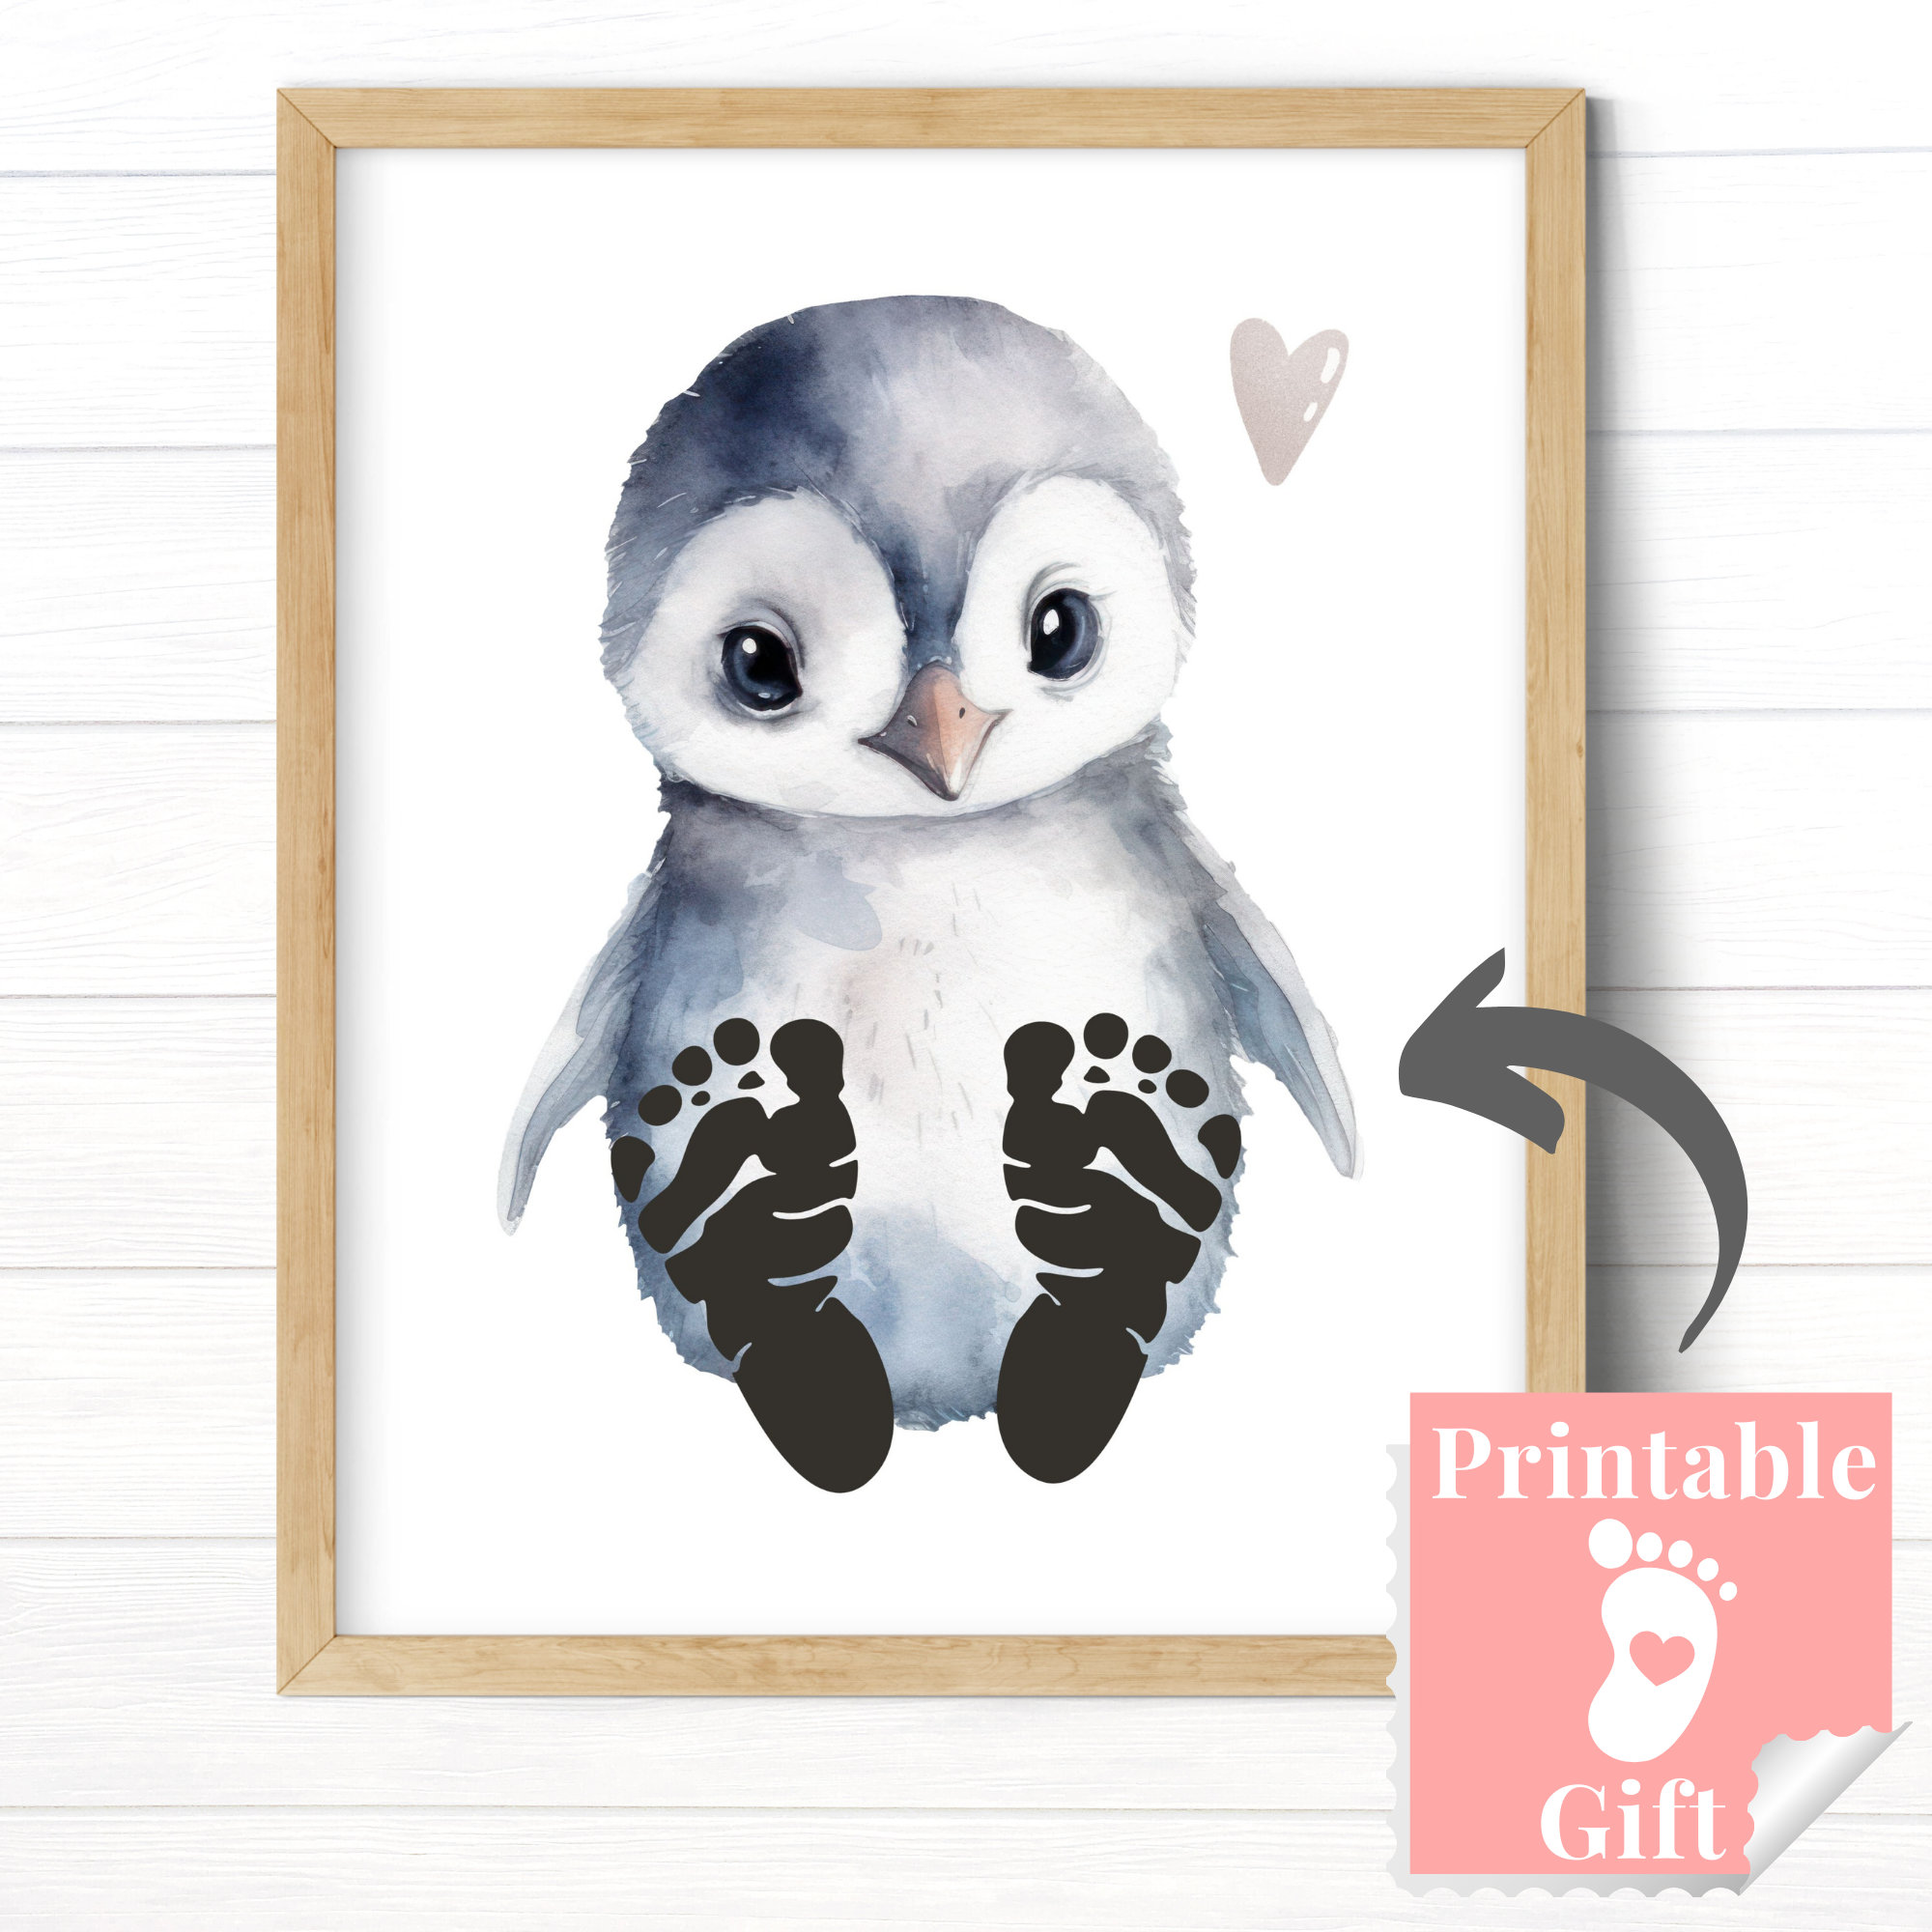 Footprint Penguin Wall Hanging - Come Together Kids